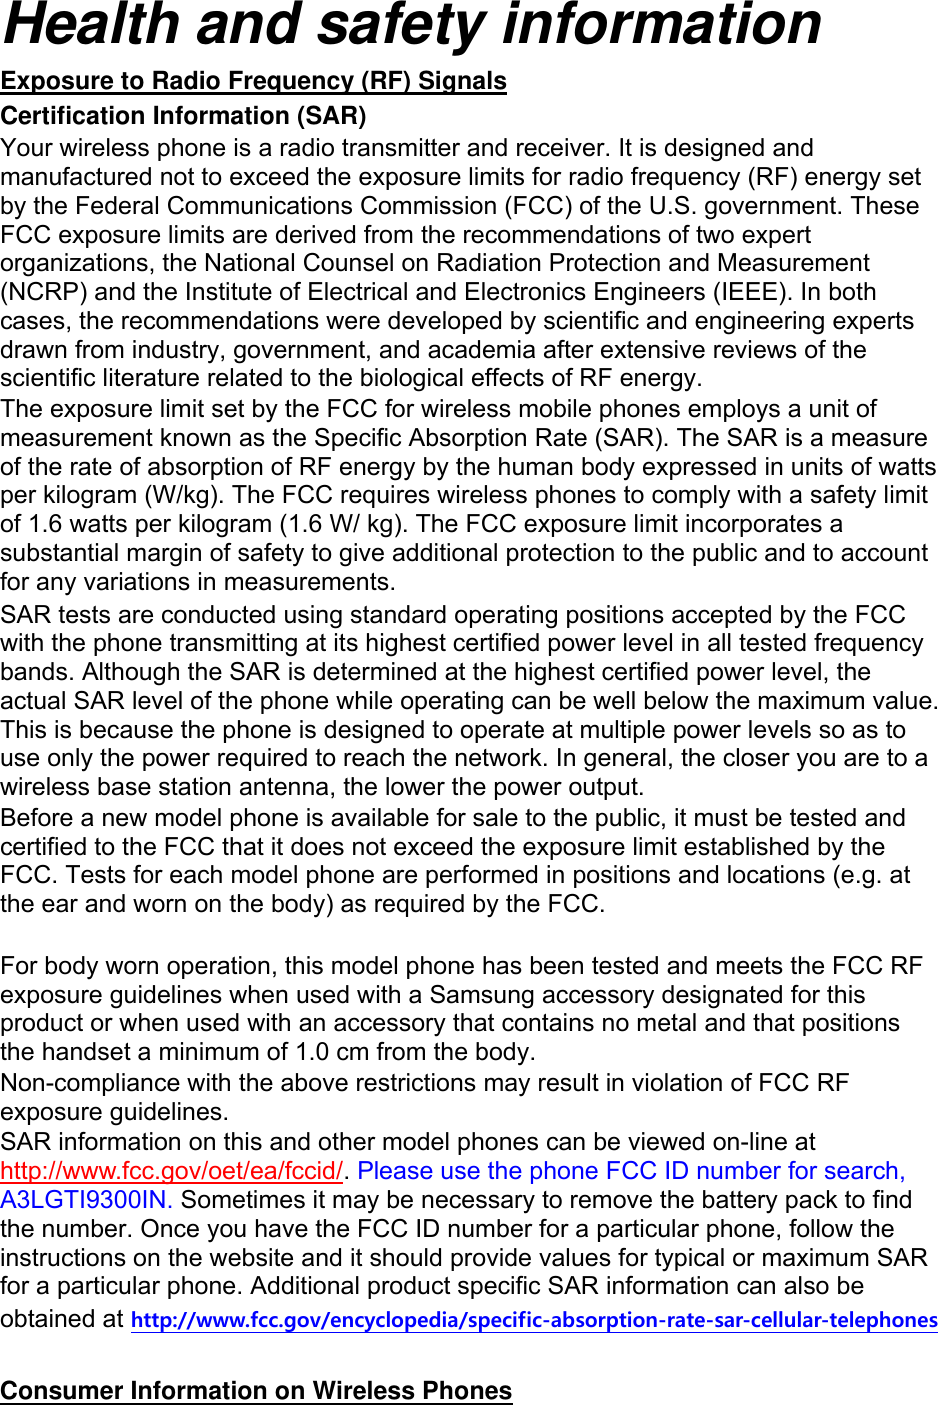 Health and safety information Exposure to Radio Frequency (RF) Signals Certification Information (SAR) Your wireless phone is a radio transmitter and receiver. It is designed and manufactured not to exceed the exposure limits for radio frequency (RF) energy set by the Federal Communications Commission (FCC) of the U.S. government. These FCC exposure limits are derived from the recommendations of two expert organizations, the National Counsel on Radiation Protection and Measurement (NCRP) and the Institute of Electrical and Electronics Engineers (IEEE). In both cases, the recommendations were developed by scientific and engineering experts drawn from industry, government, and academia after extensive reviews of the scientific literature related to the biological effects of RF energy. The exposure limit set by the FCC for wireless mobile phones employs a unit of measurement known as the Specific Absorption Rate (SAR). The SAR is a measure of the rate of absorption of RF energy by the human body expressed in units of watts per kilogram (W/kg). The FCC requires wireless phones to comply with a safety limit of 1.6 watts per kilogram (1.6 W/ kg). The FCC exposure limit incorporates a substantial margin of safety to give additional protection to the public and to account for any variations in measurements. SAR tests are conducted using standard operating positions accepted by the FCC with the phone transmitting at its highest certified power level in all tested frequency bands. Although the SAR is determined at the highest certified power level, the actual SAR level of the phone while operating can be well below the maximum value. This is because the phone is designed to operate at multiple power levels so as to use only the power required to reach the network. In general, the closer you are to a wireless base station antenna, the lower the power output. Before a new model phone is available for sale to the public, it must be tested and certified to the FCC that it does not exceed the exposure limit established by the FCC. Tests for each model phone are performed in positions and locations (e.g. at the ear and worn on the body) as required by the FCC.      For body worn operation, this model phone has been tested and meets the FCC RF exposure guidelines when used with a Samsung accessory designated for this product or when used with an accessory that contains no metal and that positions the handset a minimum of 1.0 cm from the body.   Non-compliance with the above restrictions may result in violation of FCC RF exposure guidelines. SAR information on this and other model phones can be viewed on-line at http://www.fcc.gov/oet/ea/fccid/. Please use the phone FCC ID number for search, A3LGTI9300IN. Sometimes it may be necessary to remove the battery pack to find the number. Once you have the FCC ID number for a particular phone, follow the instructions on the website and it should provide values for typical or maximum SAR for a particular phone. Additional product specific SAR information can also be obtained at http://www.fcc.gov/encyclopedia/specific-absorption-rate-sar-cellular-telephones  Consumer Information on Wireless Phones 